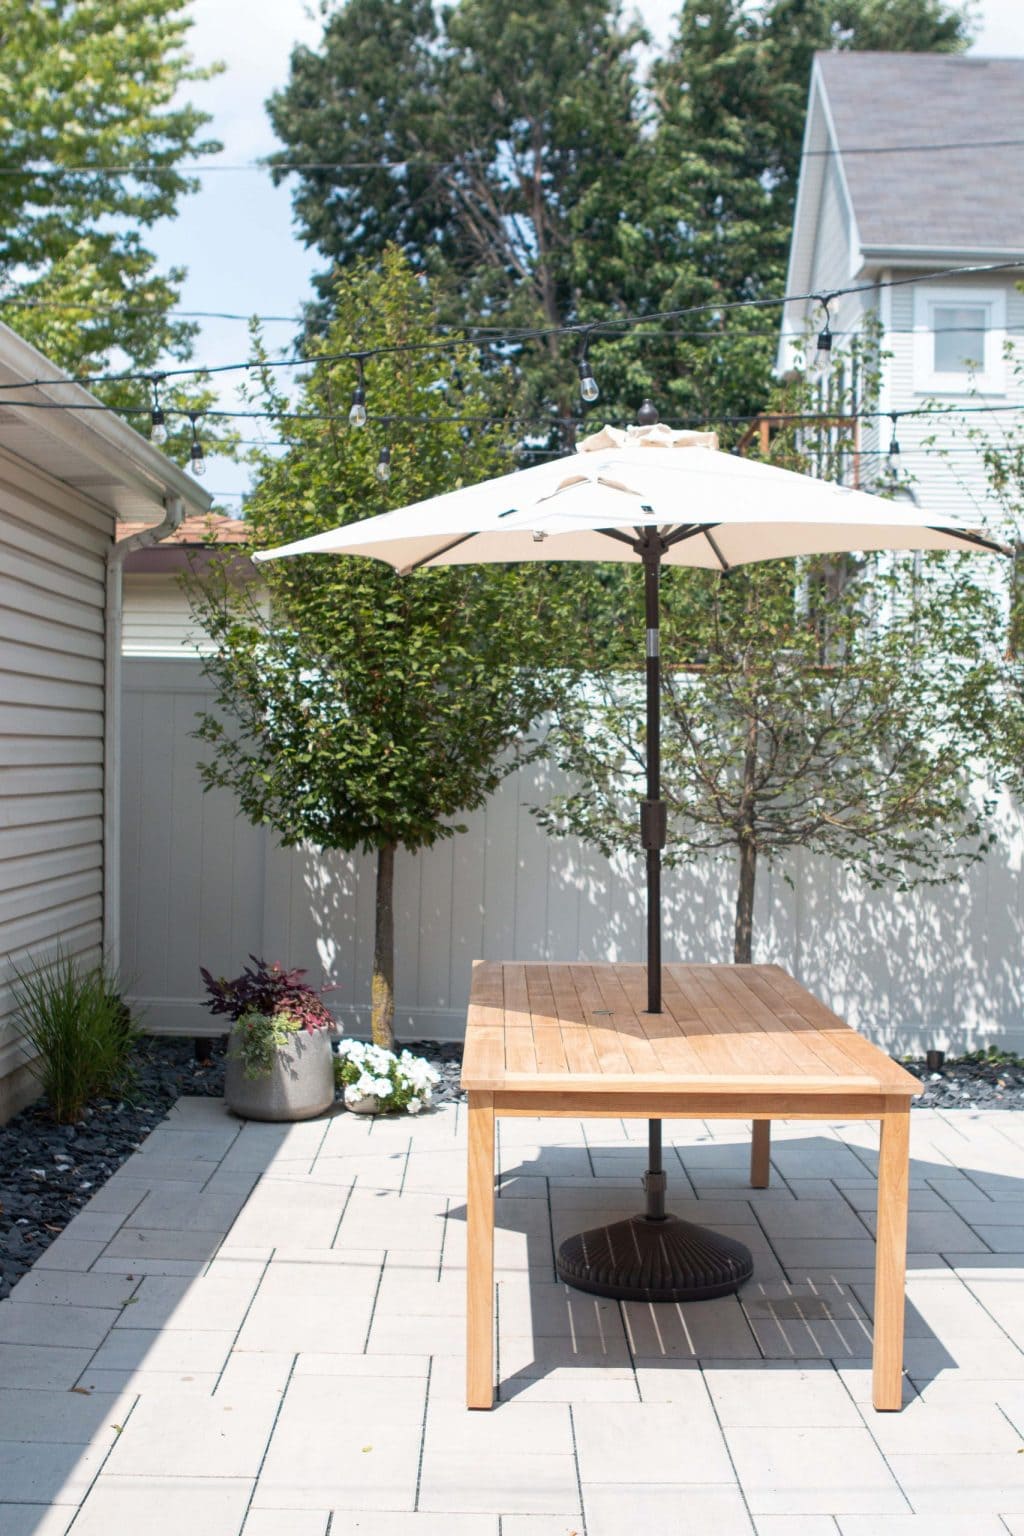 Our backyard projects to-do list